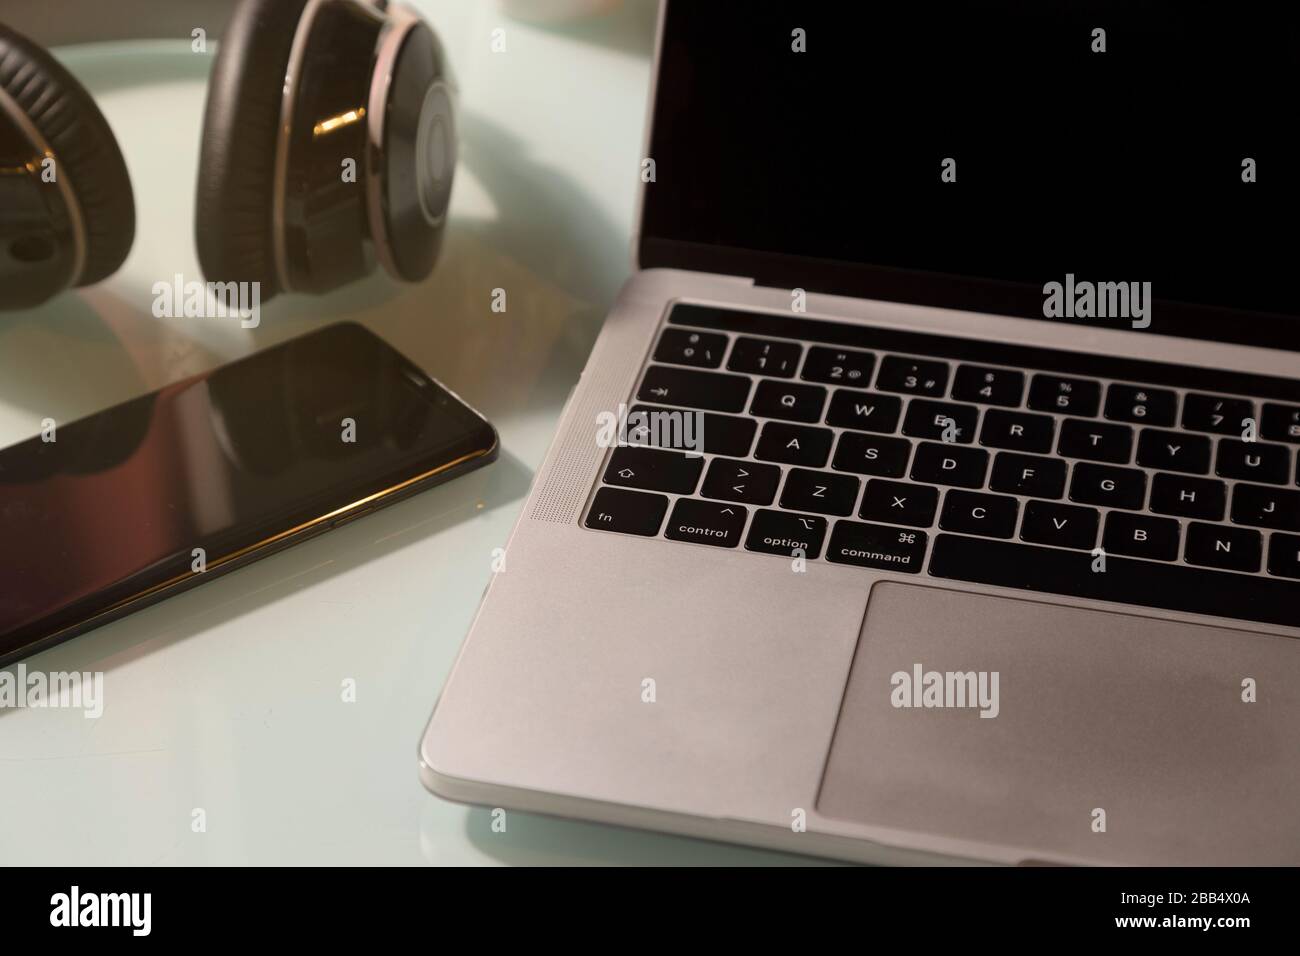 Headphones, laptop and mobile phone on the glass table. Top view Stock Photo